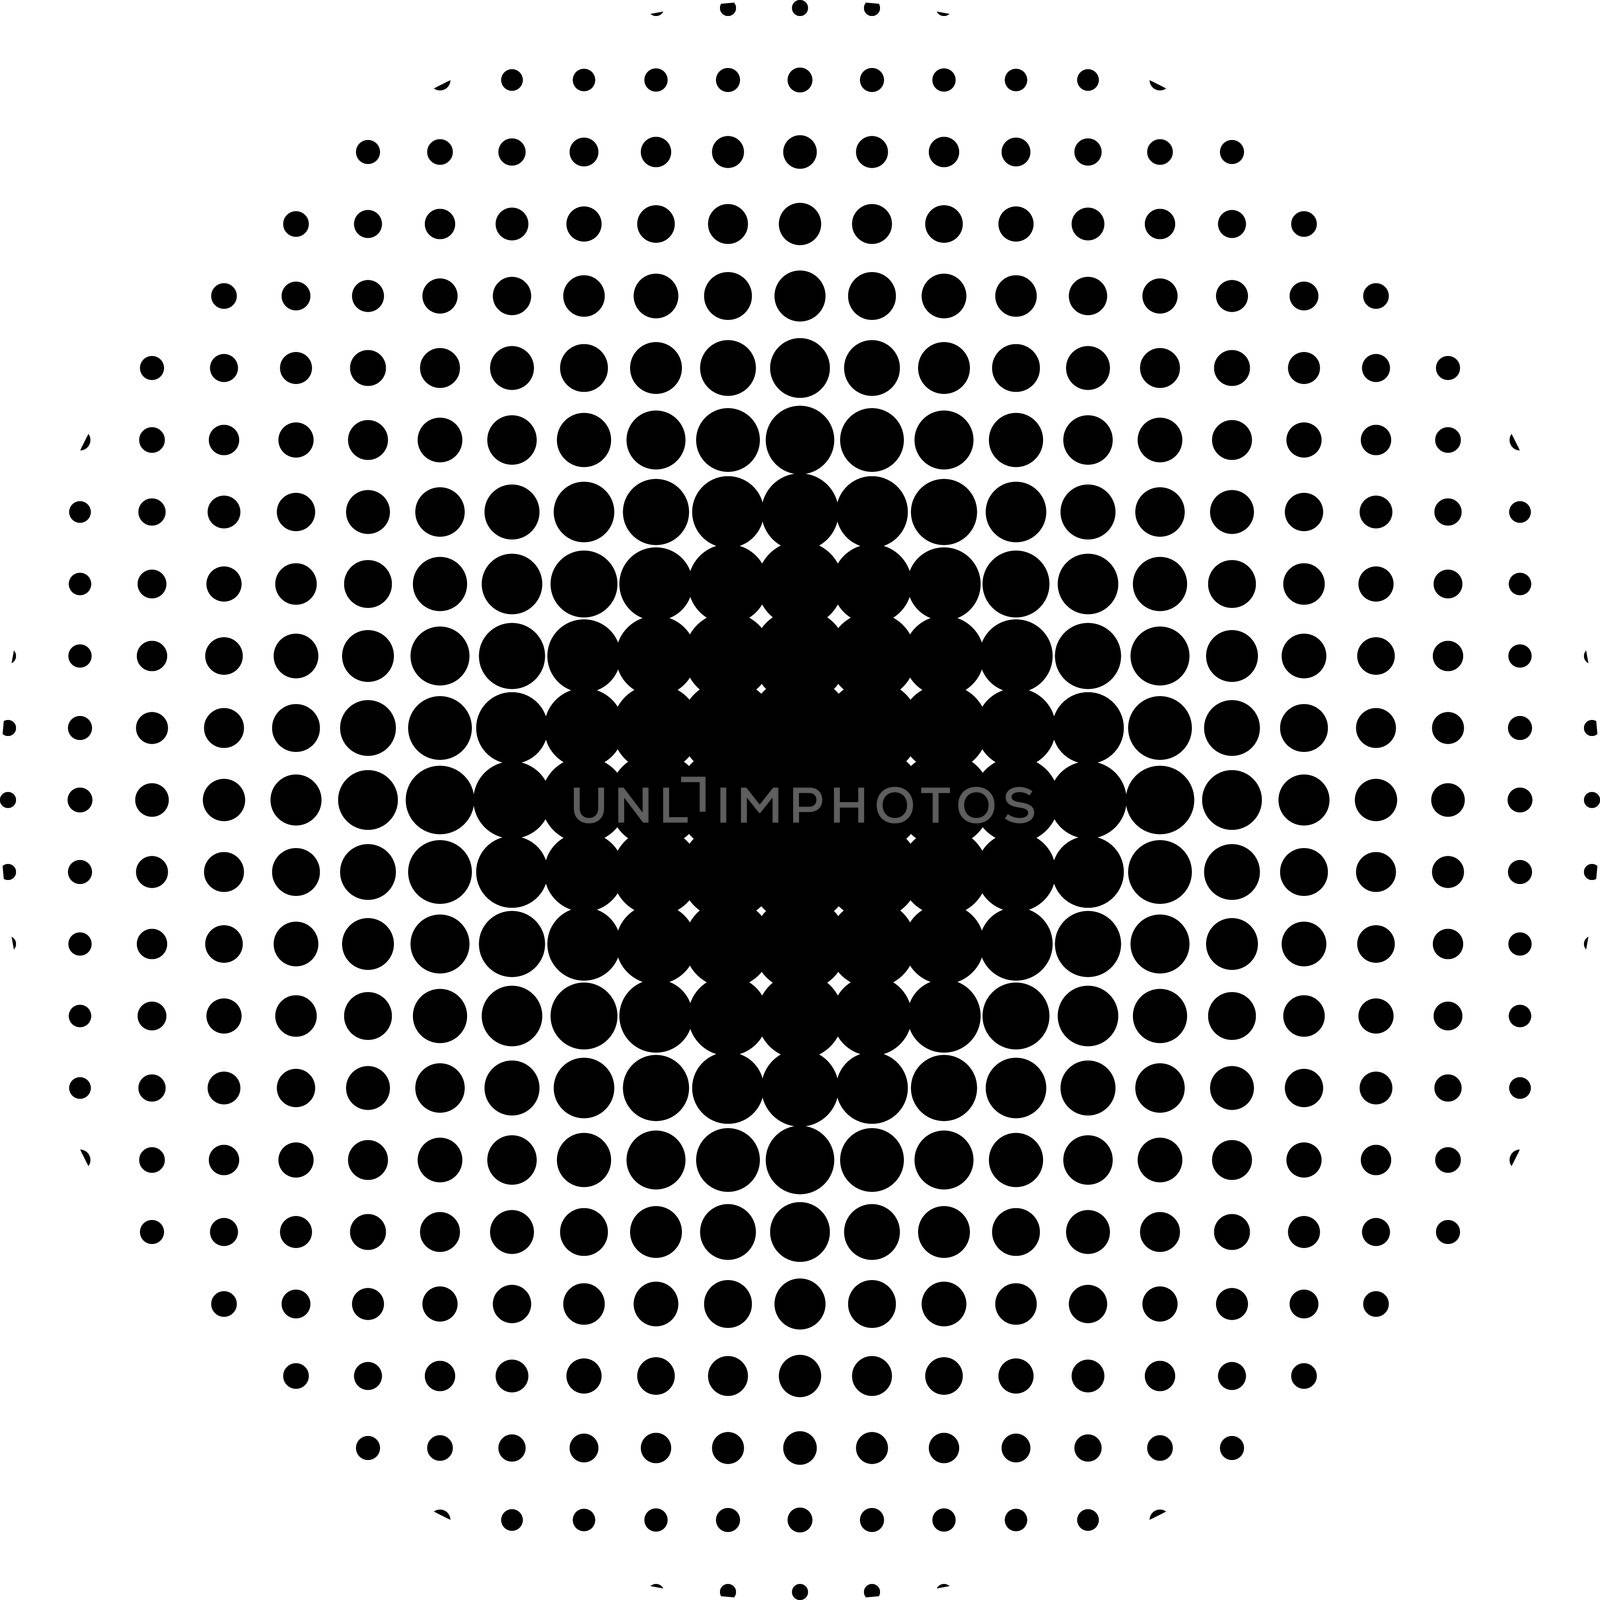 halftone cicle pattern